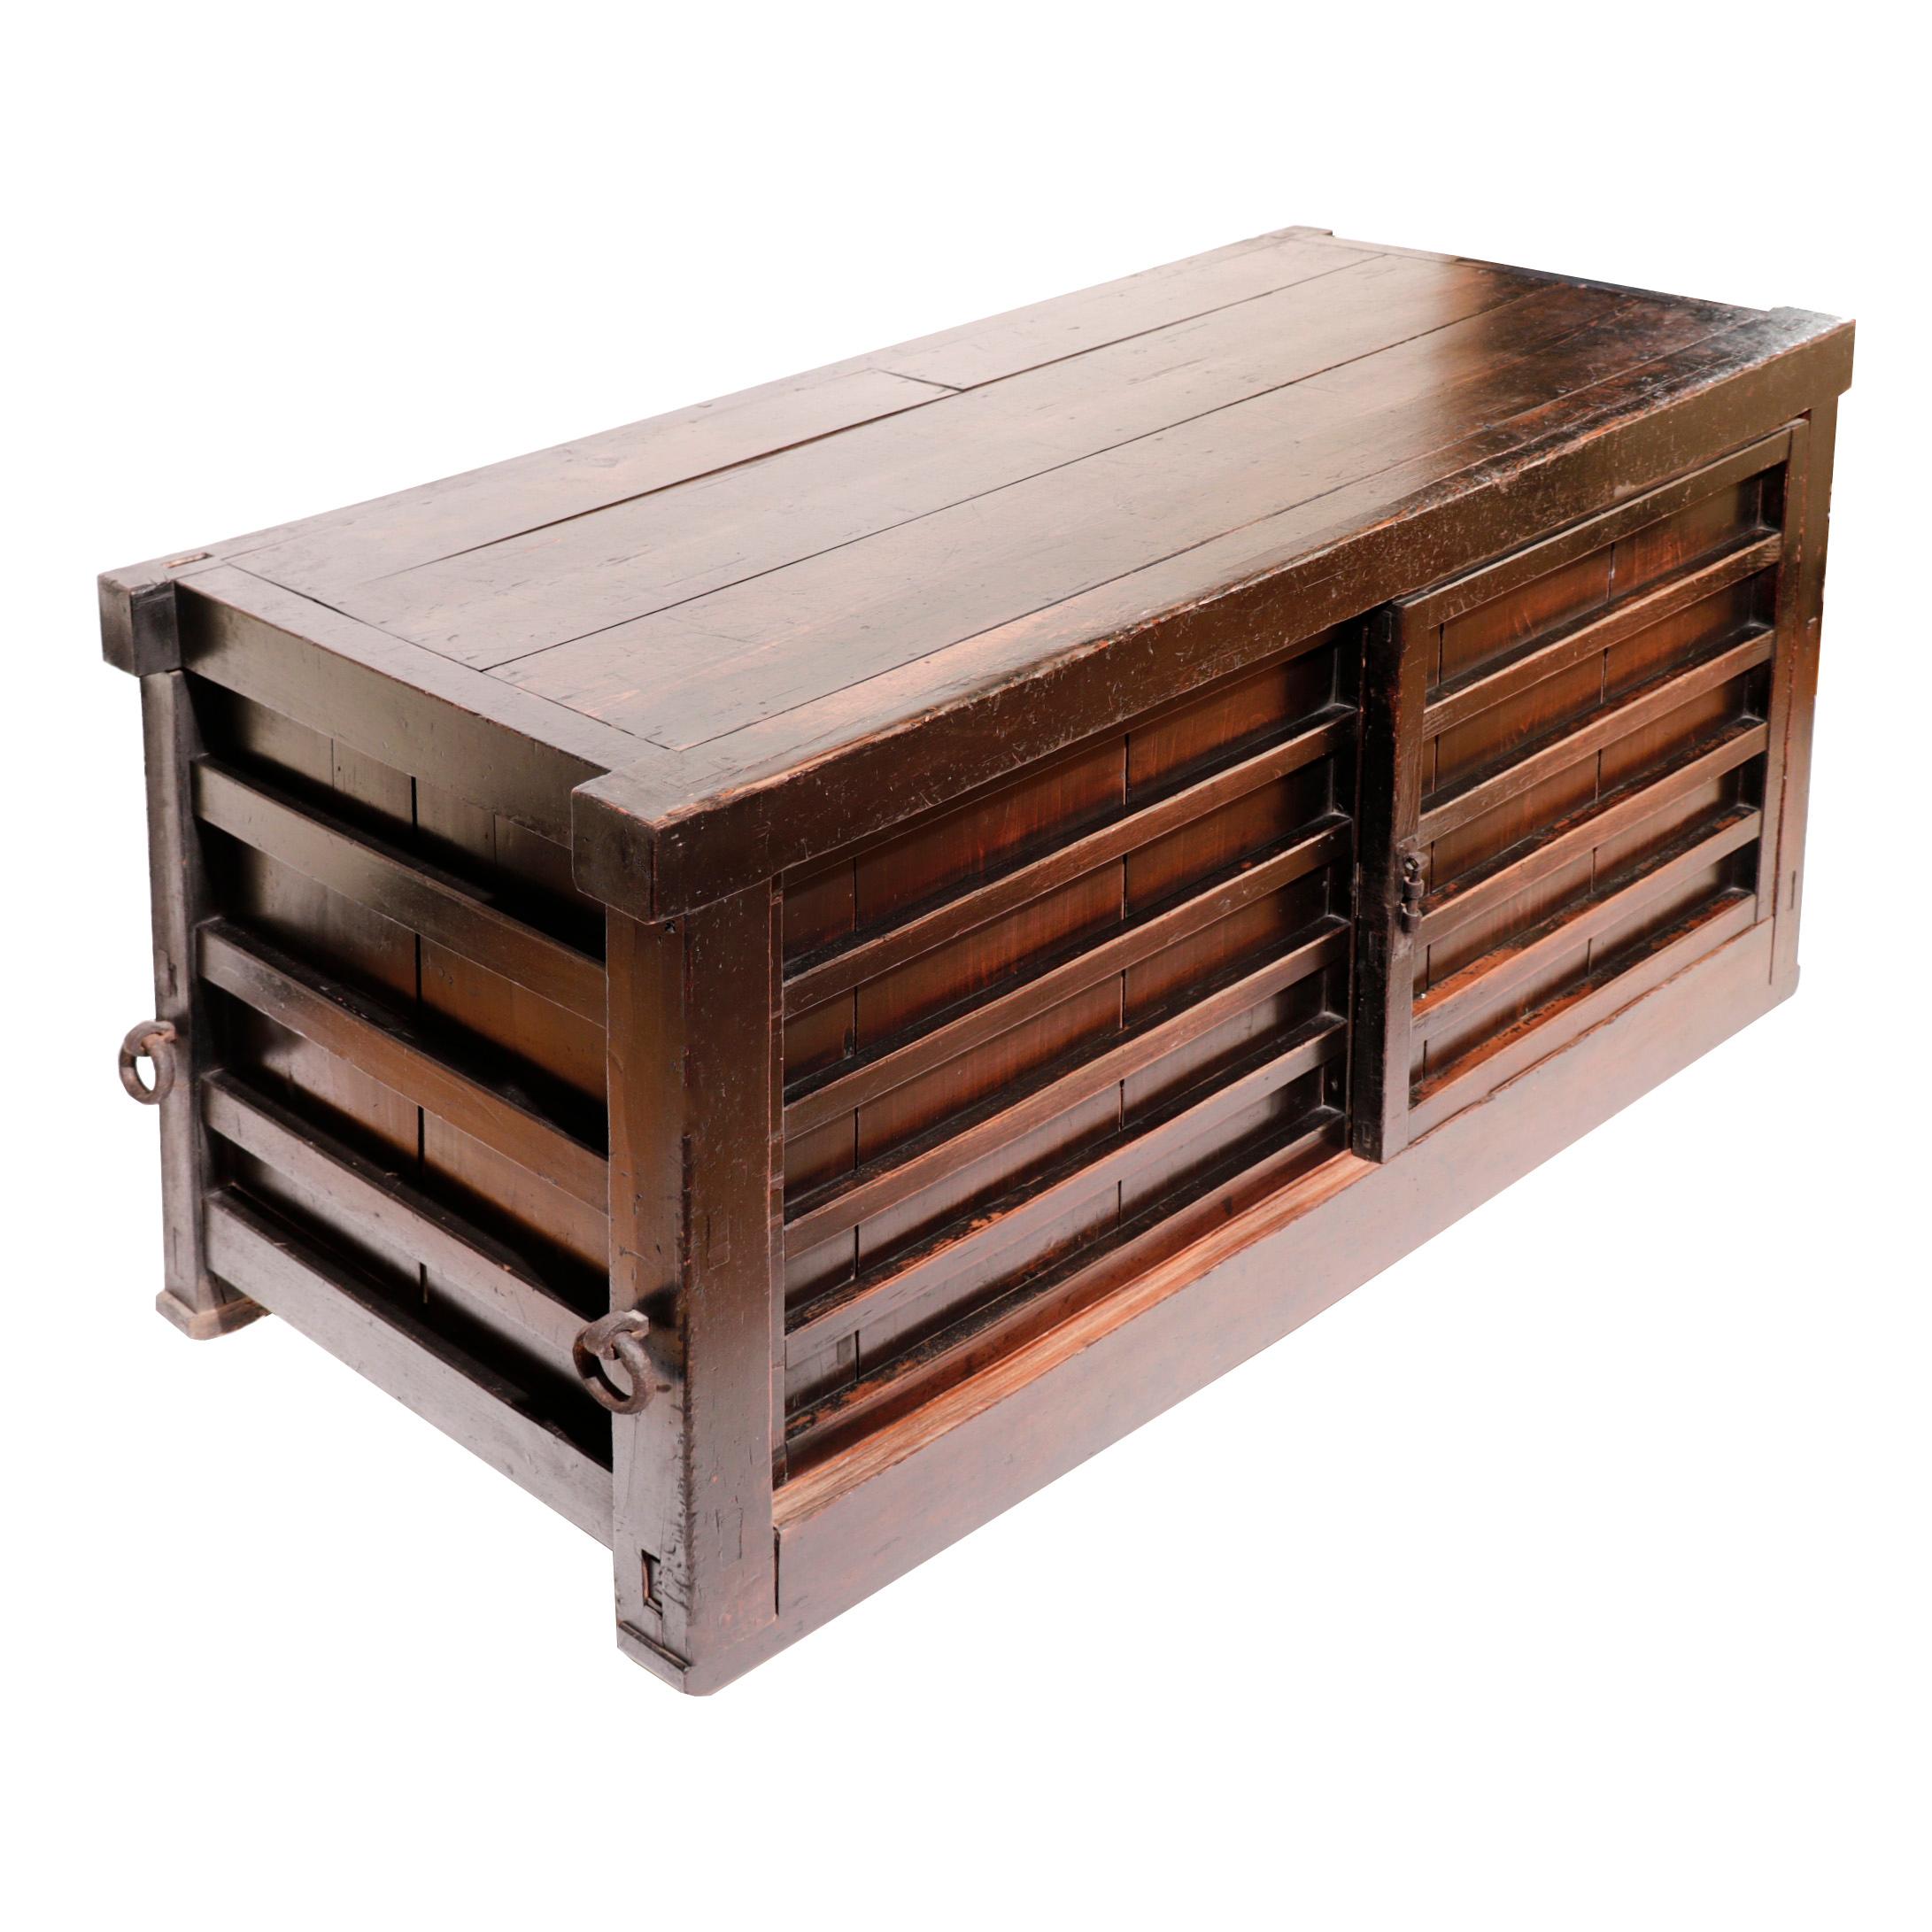 Japanese Kuruma-dansu, a wheeled storage chest traditionally kept in the Kura (storeroom) for the specific purpose of containing valuables, thus the wheeled carriage for a quick exit in case of fire. This version traditionally constructed with